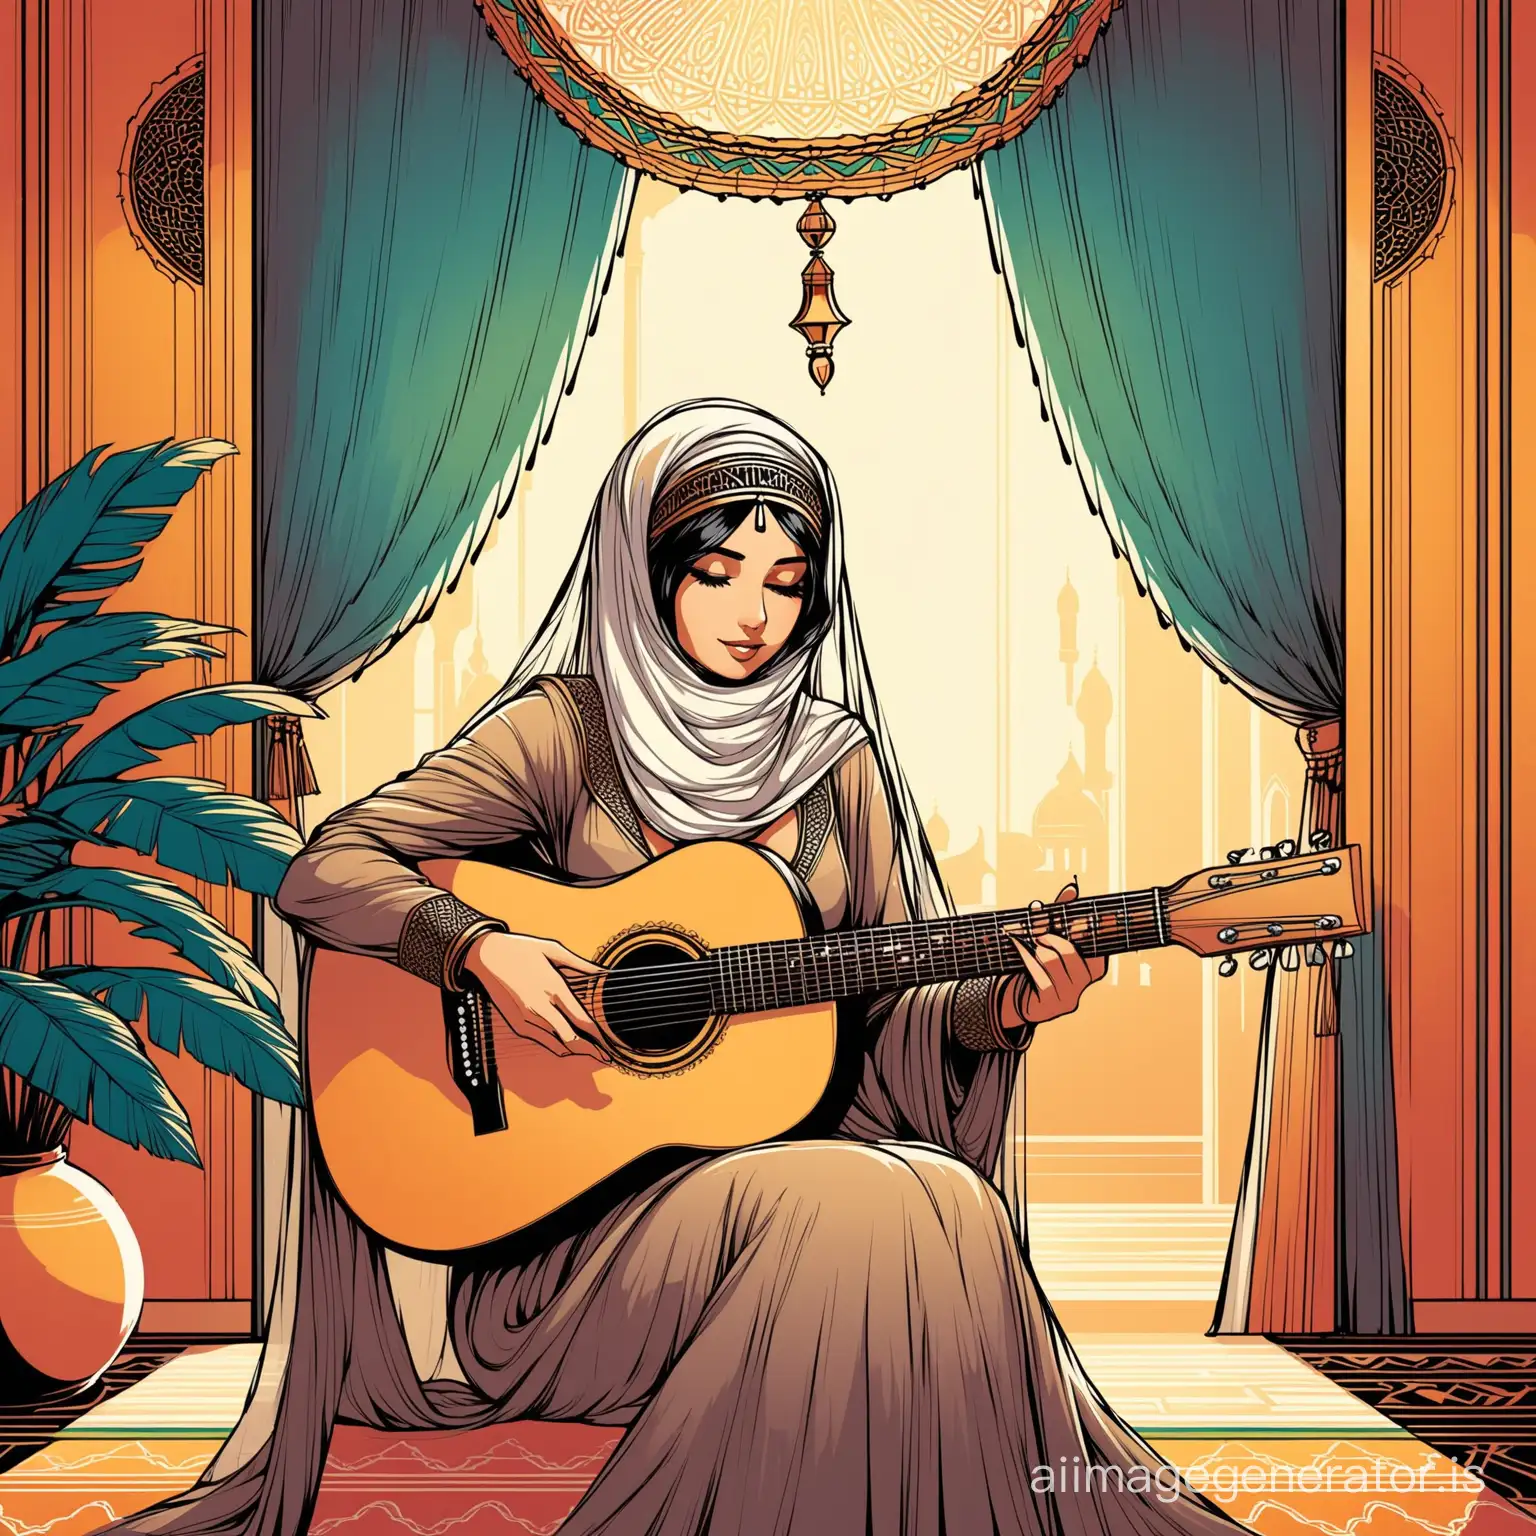 veiled Arab woman playing guitar in her interior drawing style art deco illustration